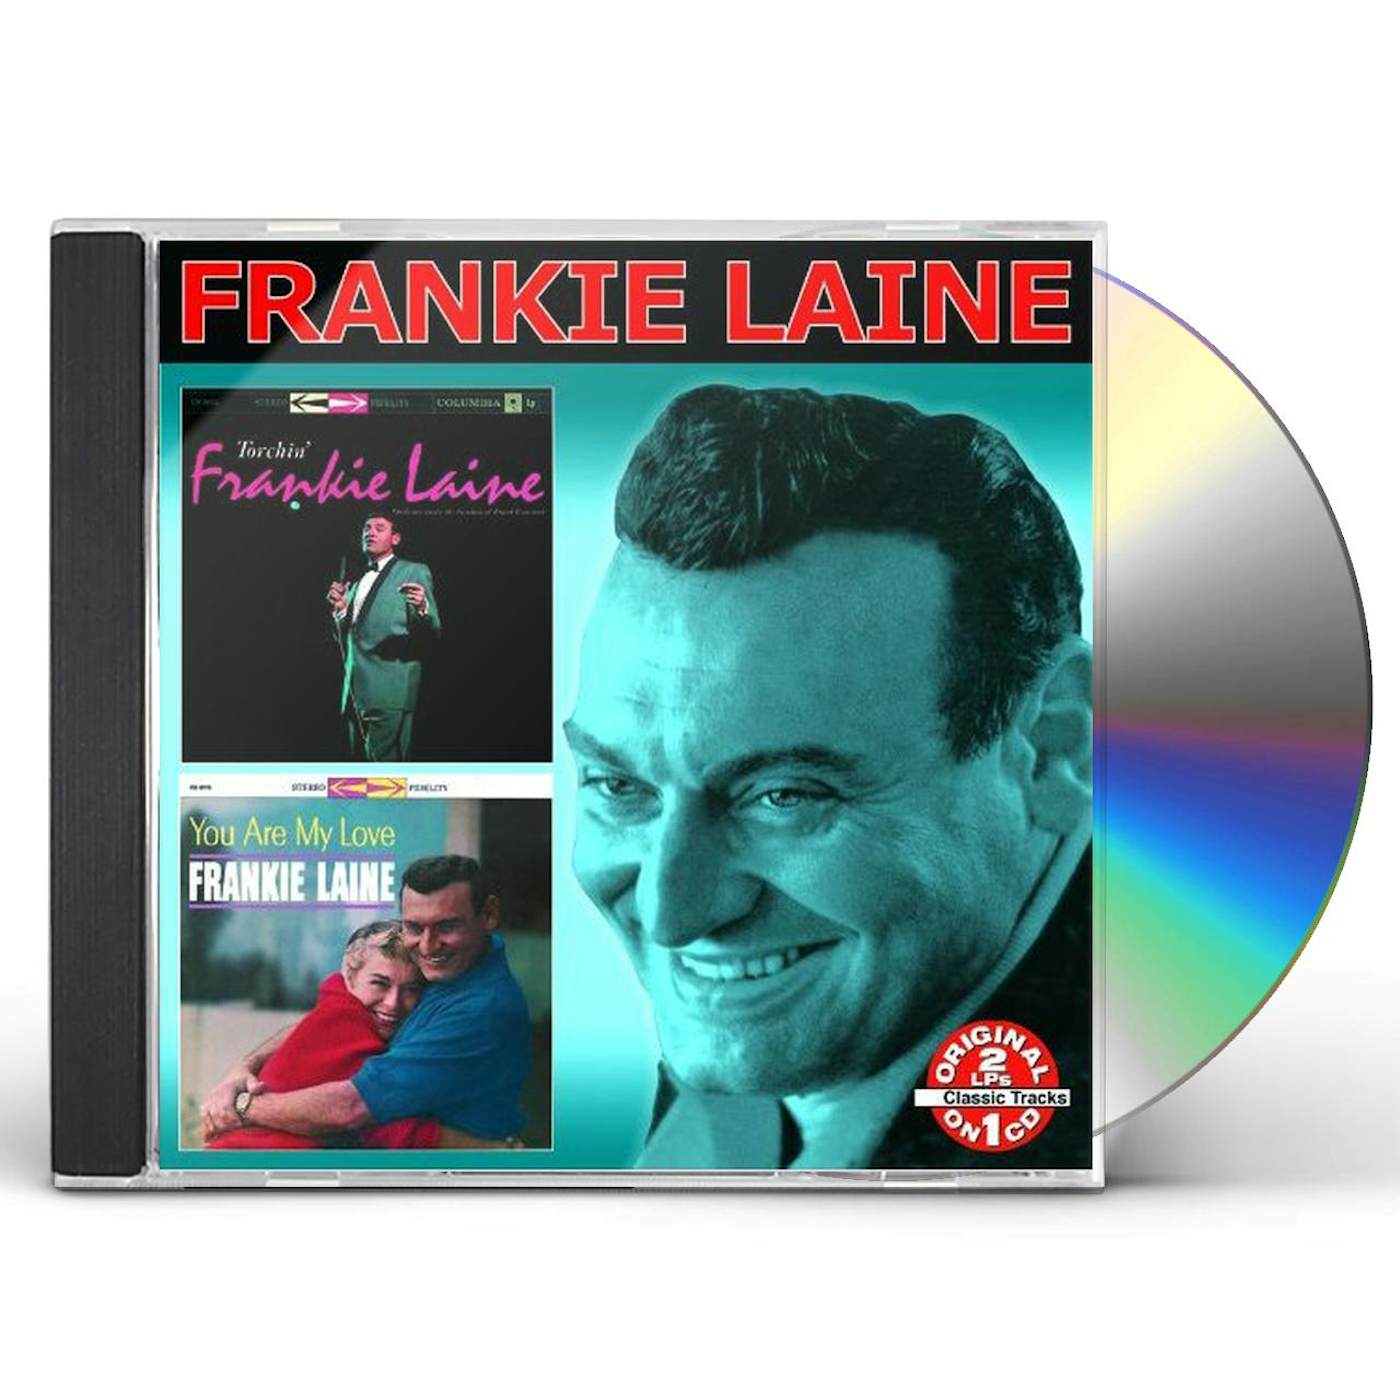 Frankie Laine TORCHIN: YOU ARE MY LOVE CD